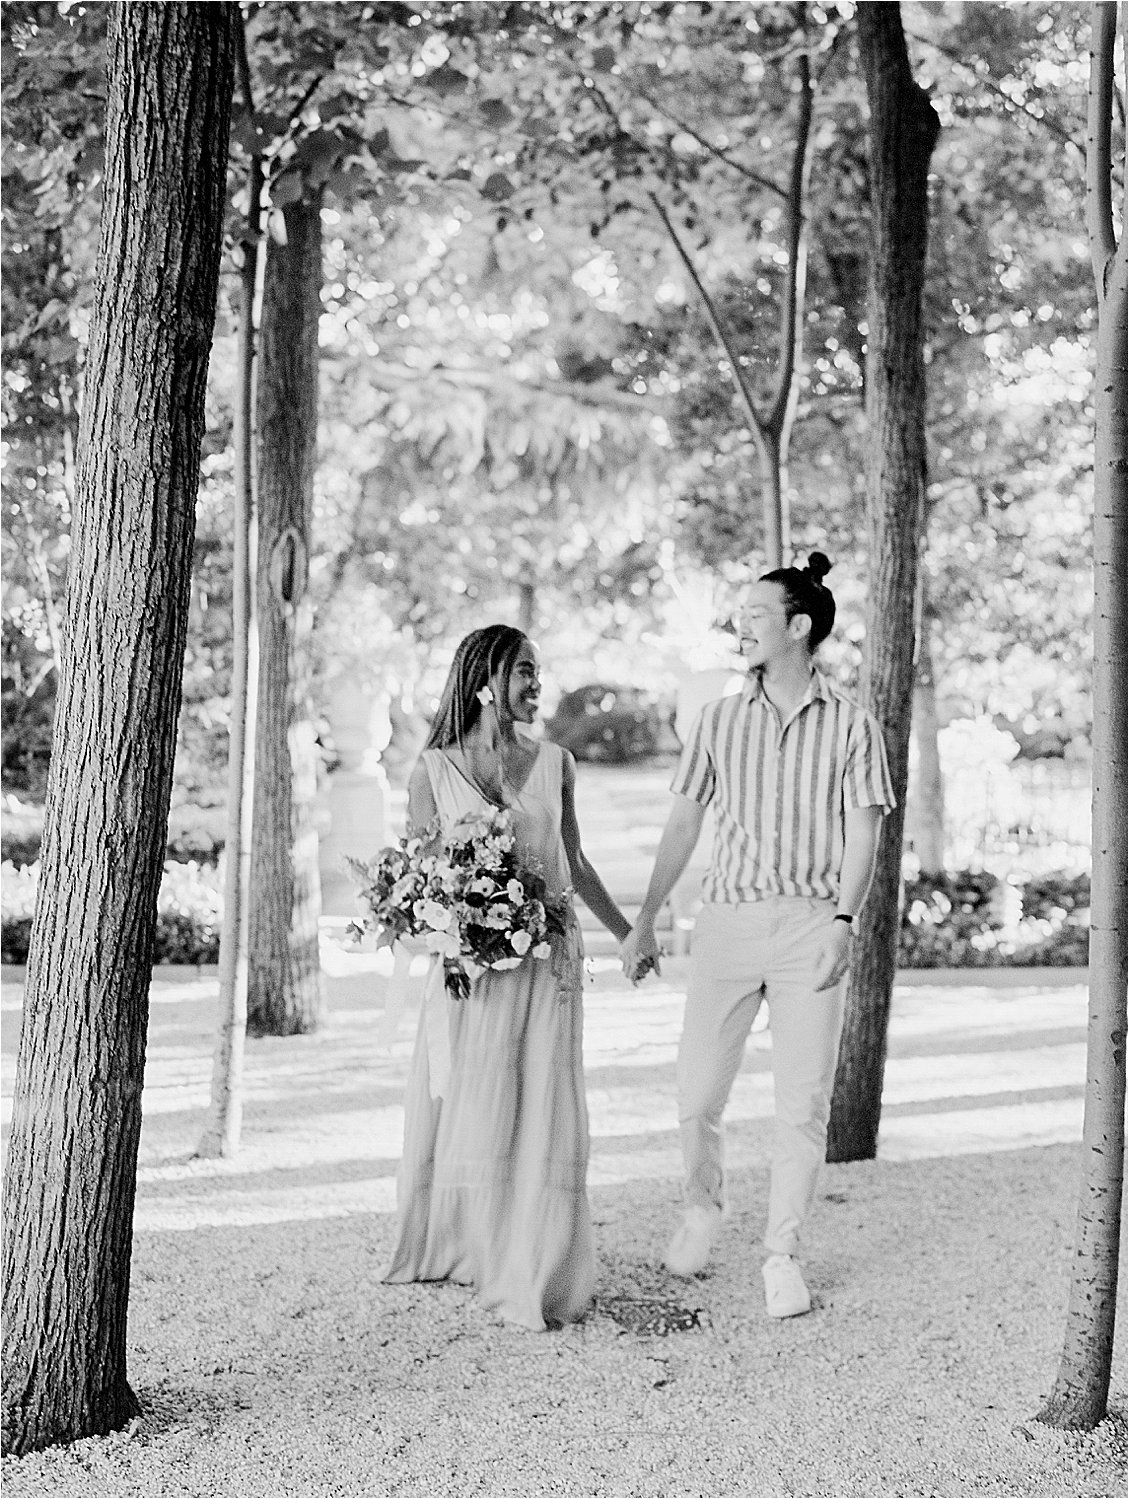 Black and White Film Image with DC + Destination Film Wedding Photographer, Renee Hollingshead